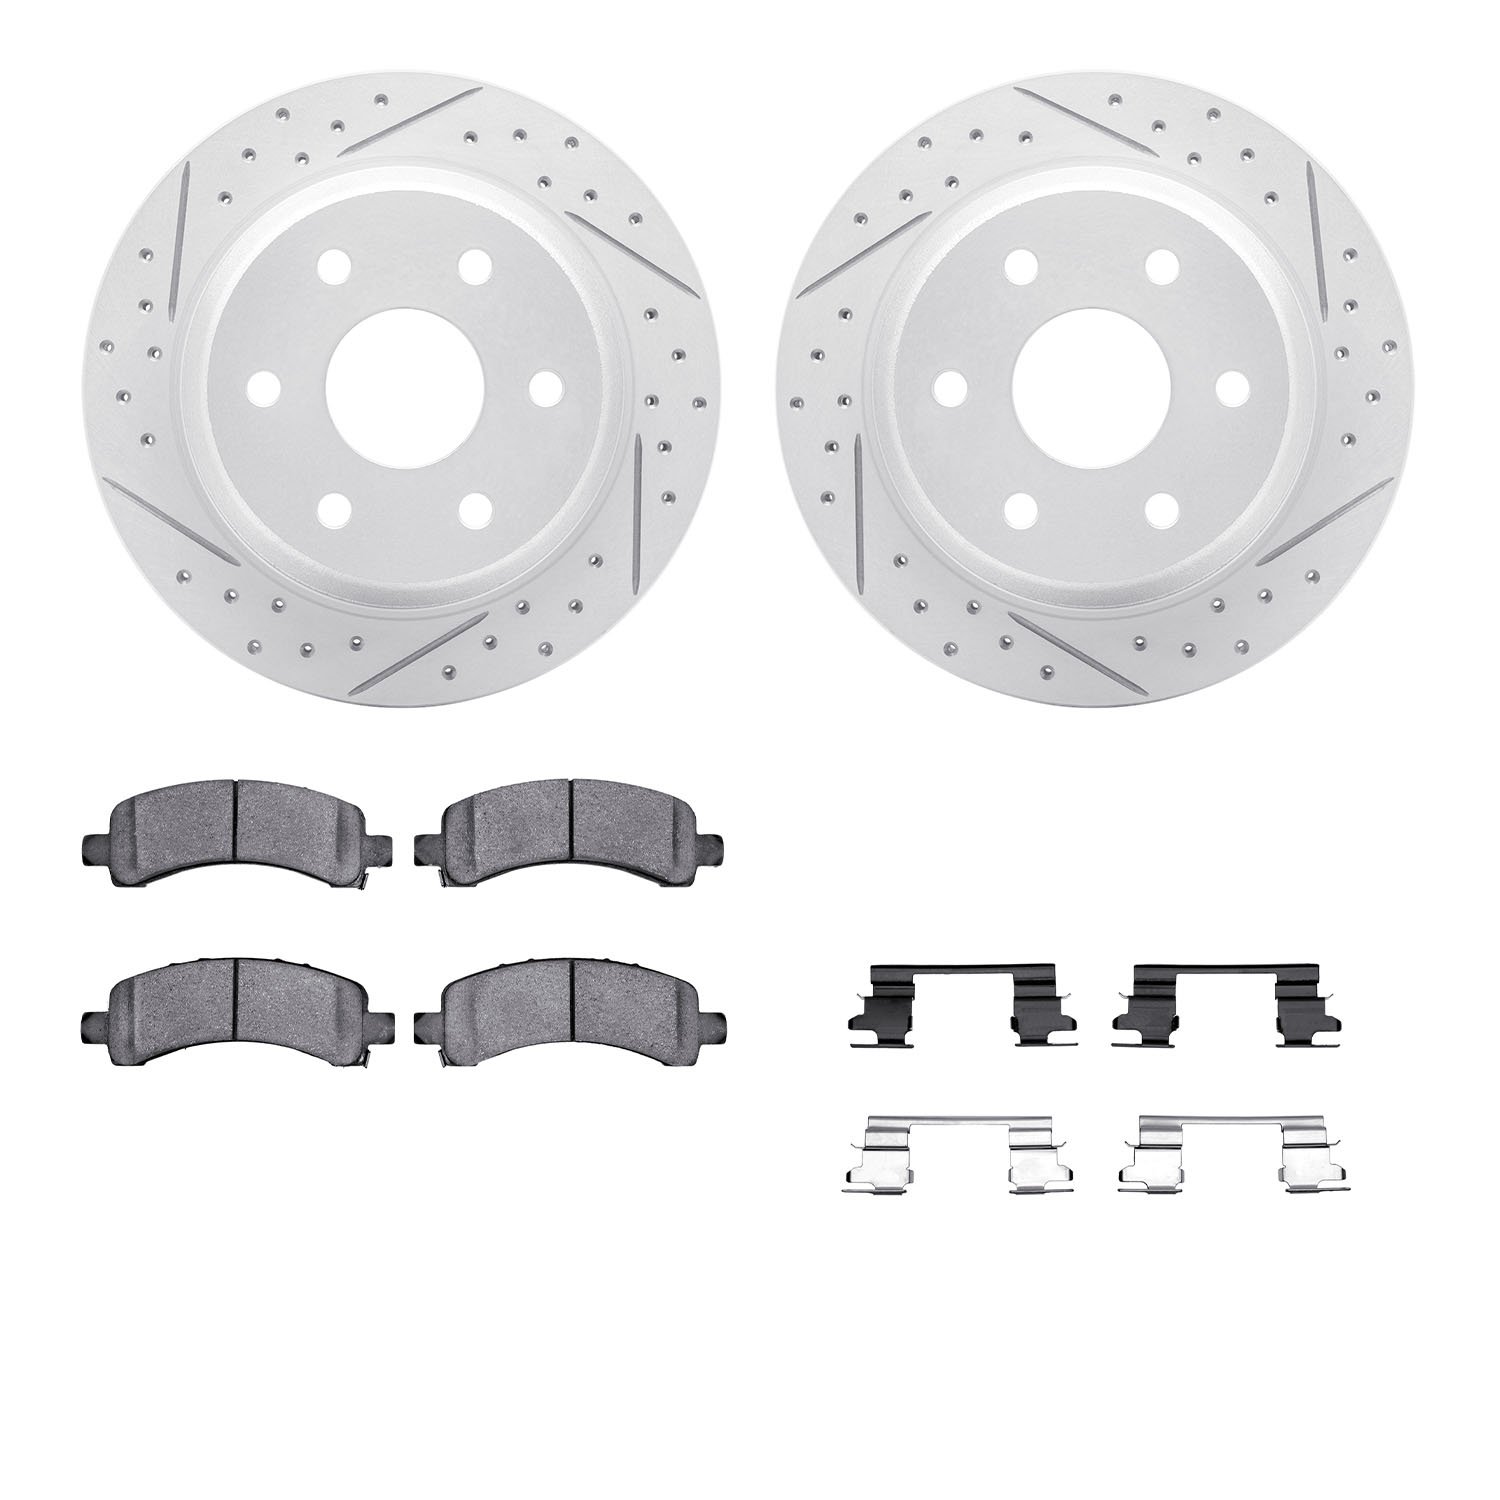 2212-48035 Geoperformance Drilled/Slotted Rotors w/Heavy-Duty Pads Kit & Hardware, 2002-2014 GM, Position: Rear